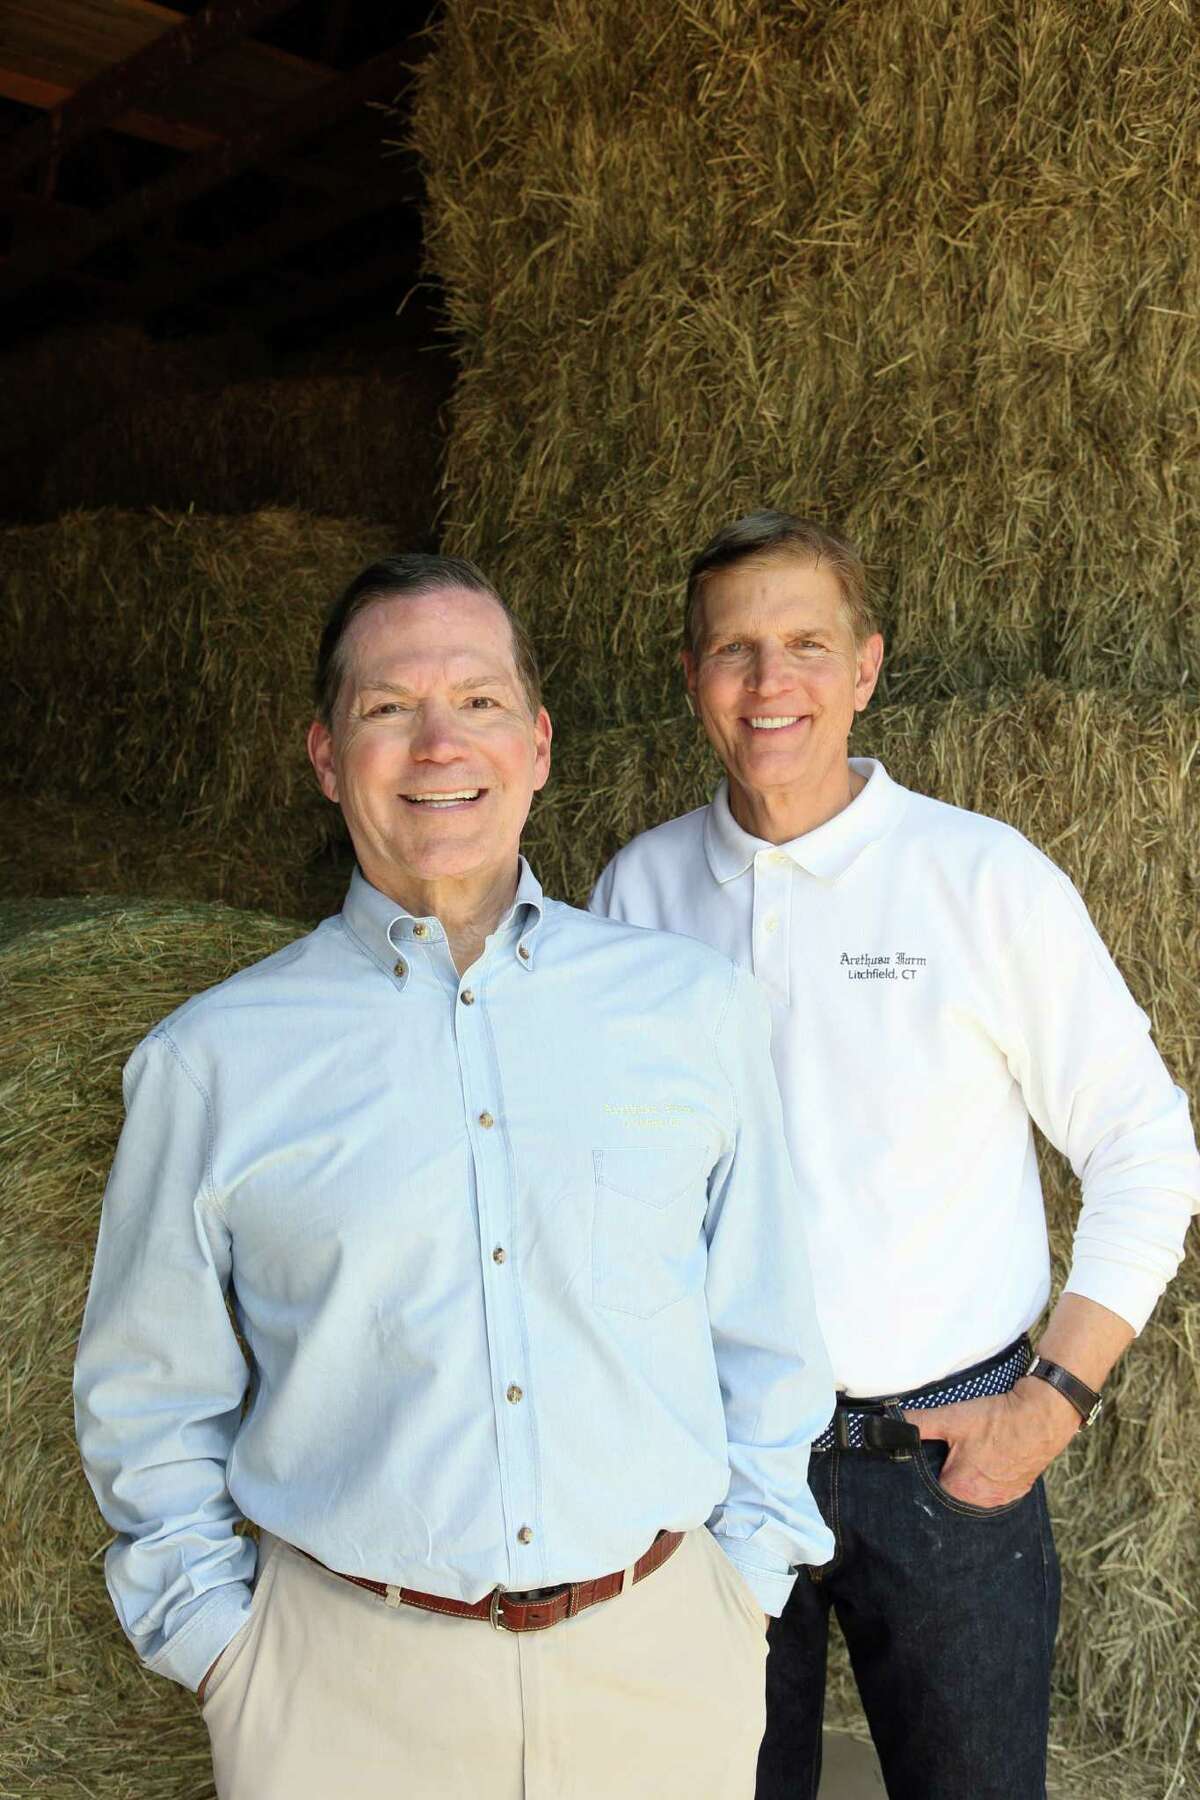 Owners of the Arethusa Farm George Malkemus, left, and Tony Yurgaitis in the hay barn on their dairy farm in Litchfield.